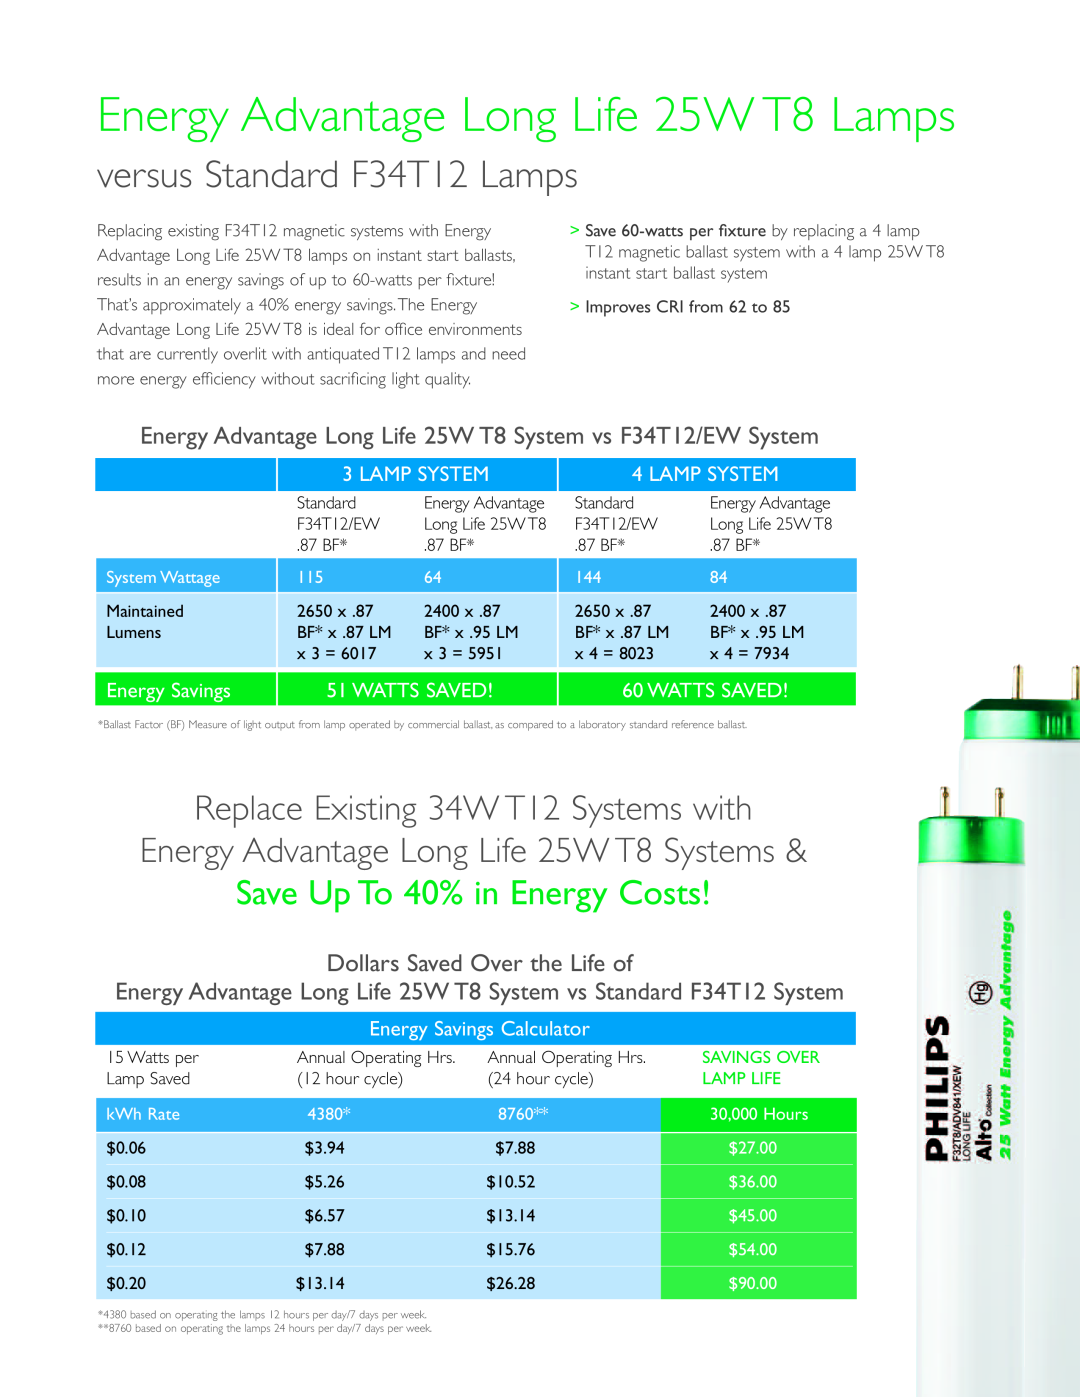 Philips 25W T8 Lamps versus Standard F34T12 Lamps, Replace Existing 34W T12 Systems with, Save Up To 40% in Energy Costs 